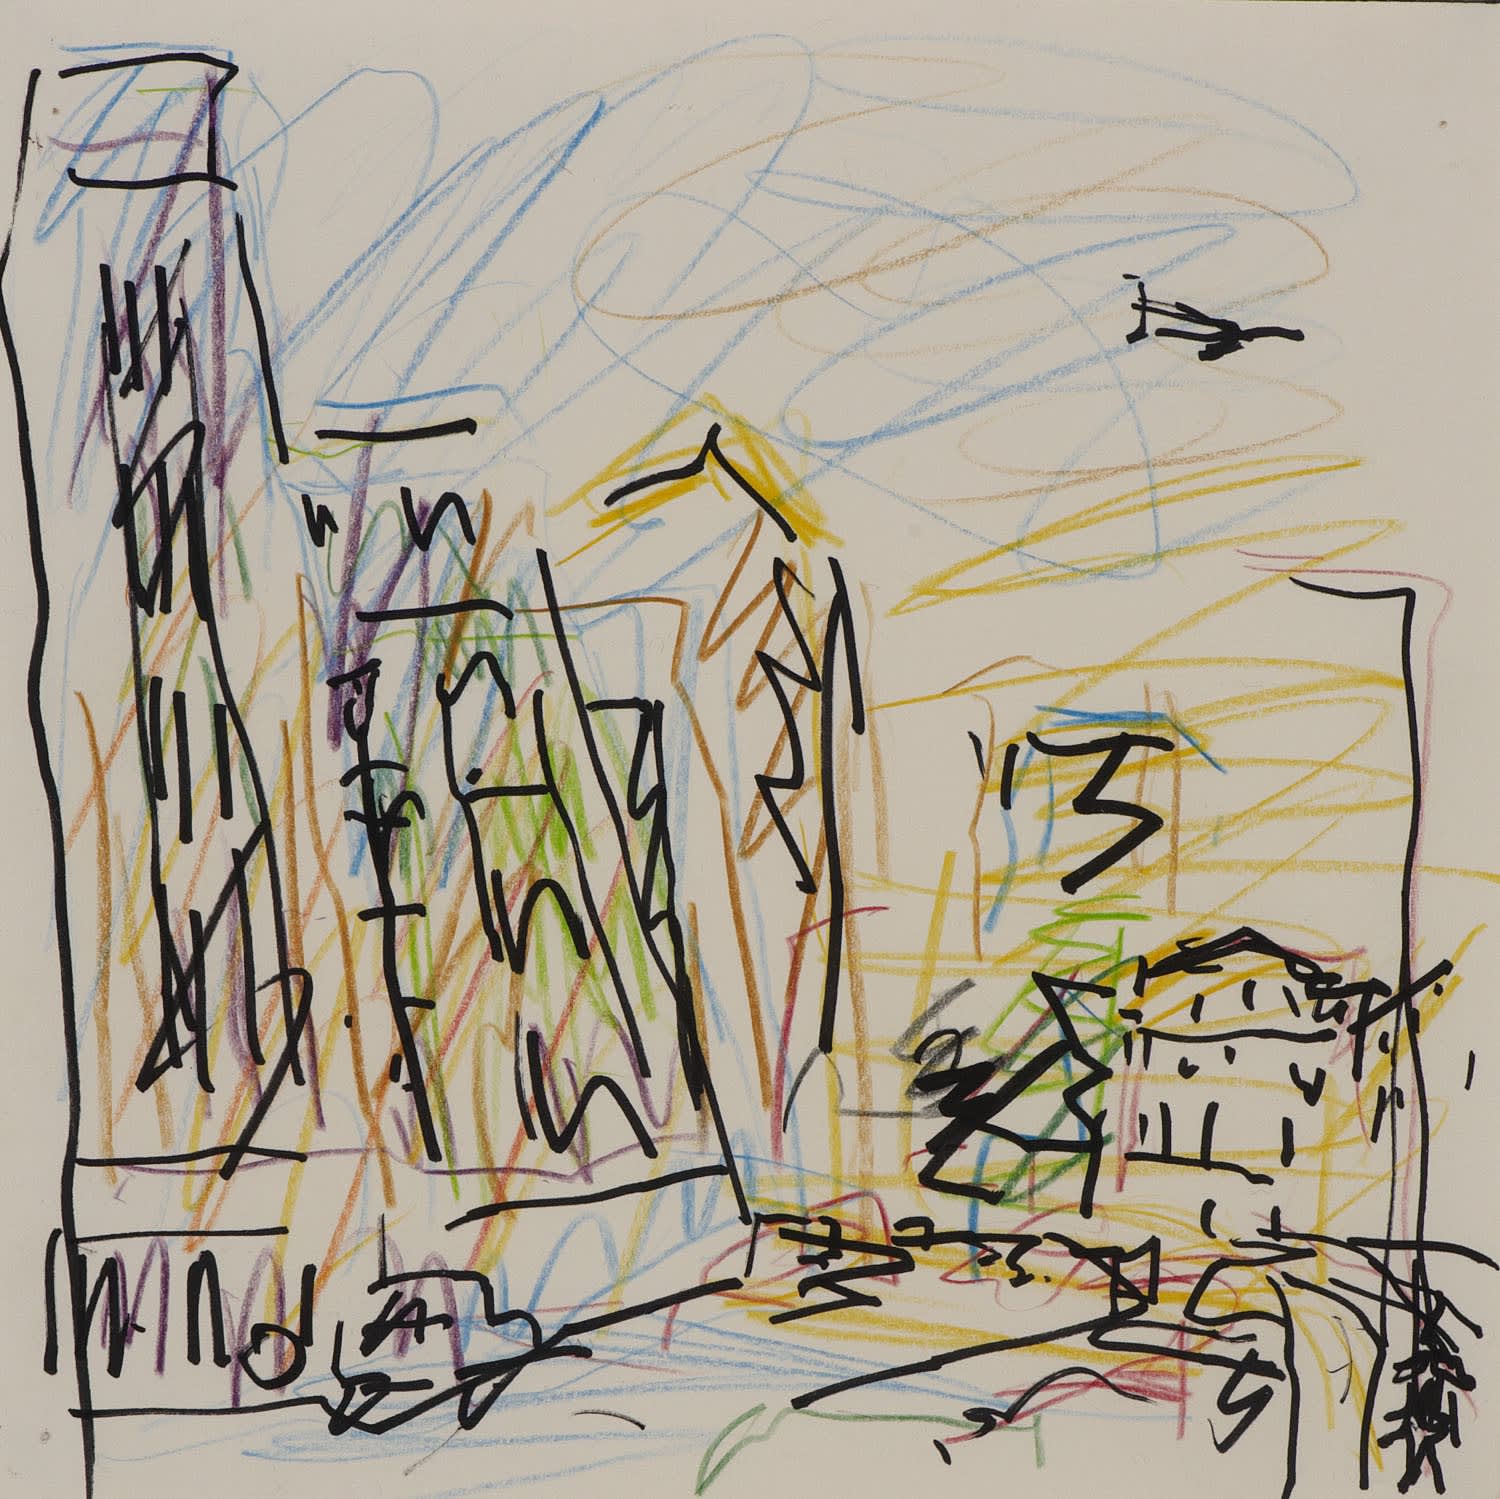 Frank Auerbach (1931-) Study for Mornington Crescent, Summer Morning II 2004 Crayon on paper 21 x 21 cm Ben Uri Collection © Frank Auerbach, courtesy Marlborough Fine Art To see and discover more about this artist click here